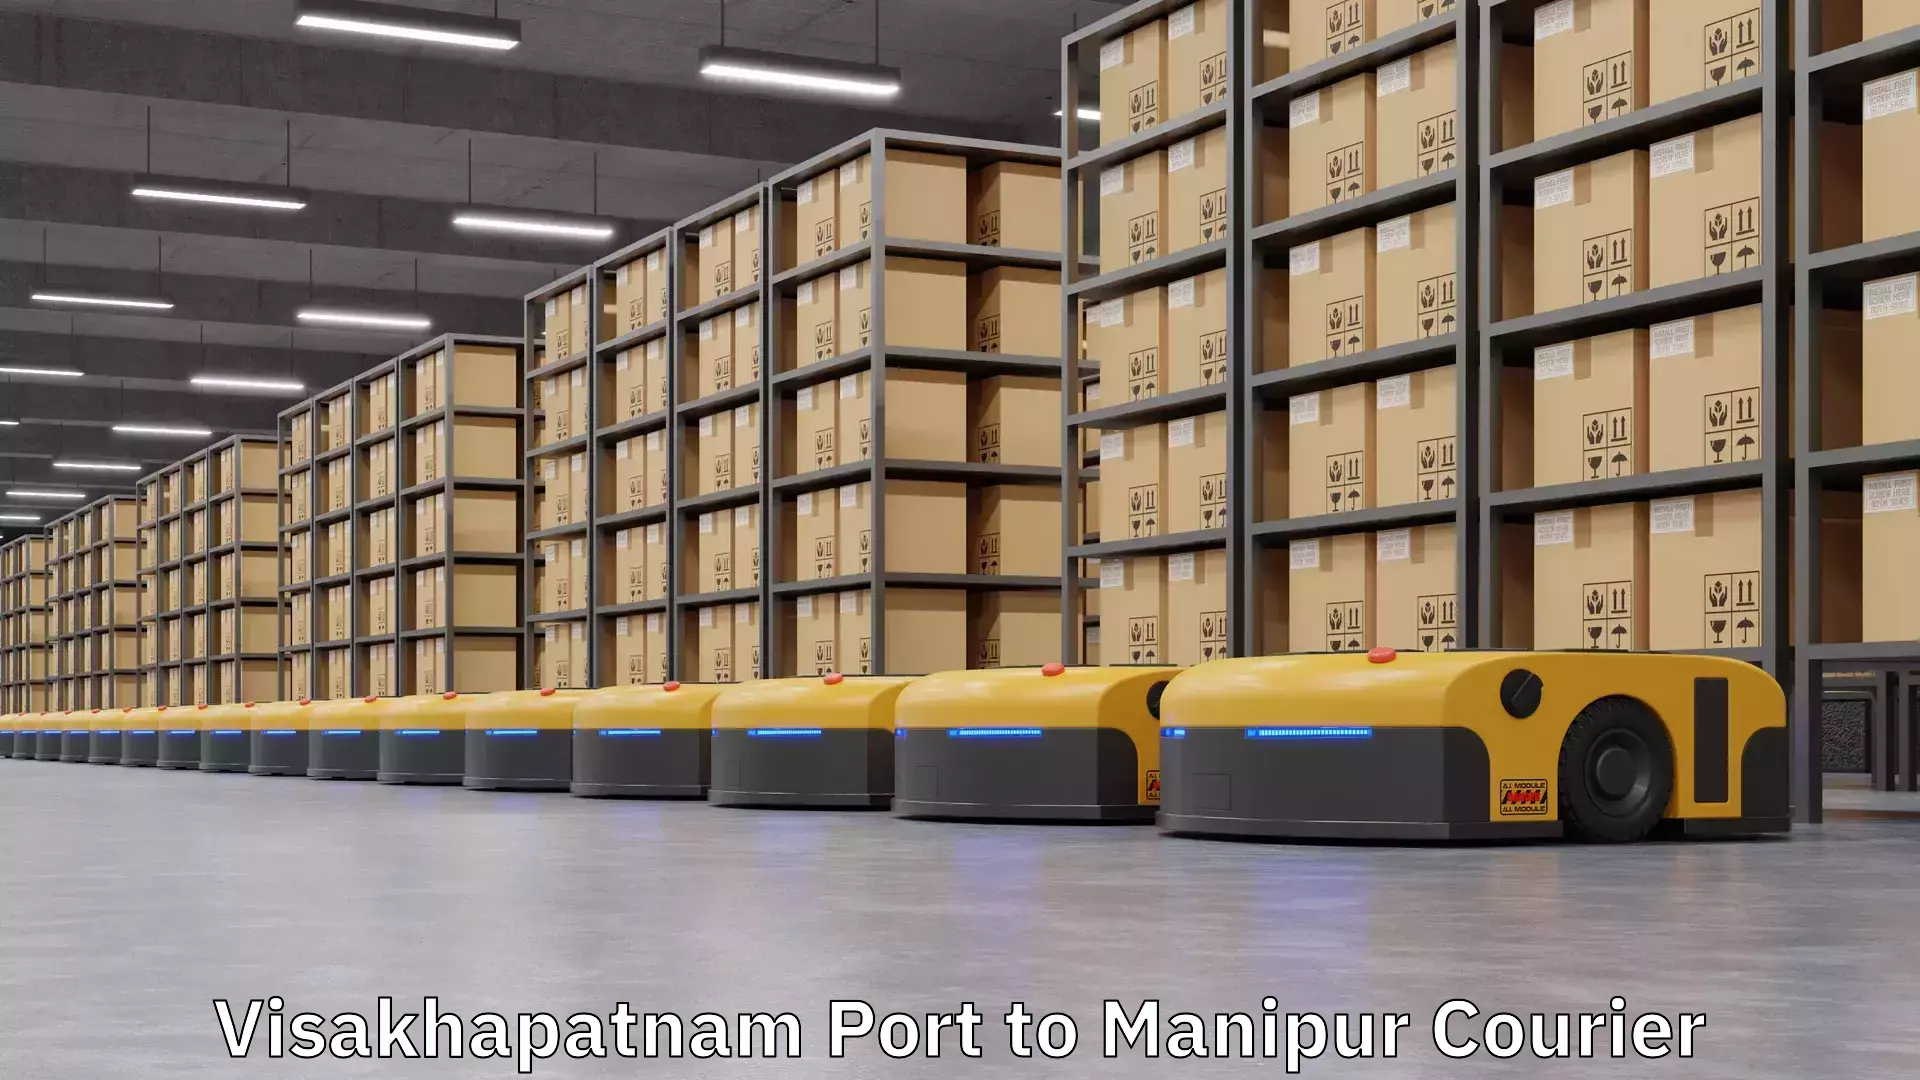 Business delivery service Visakhapatnam Port to Manipur